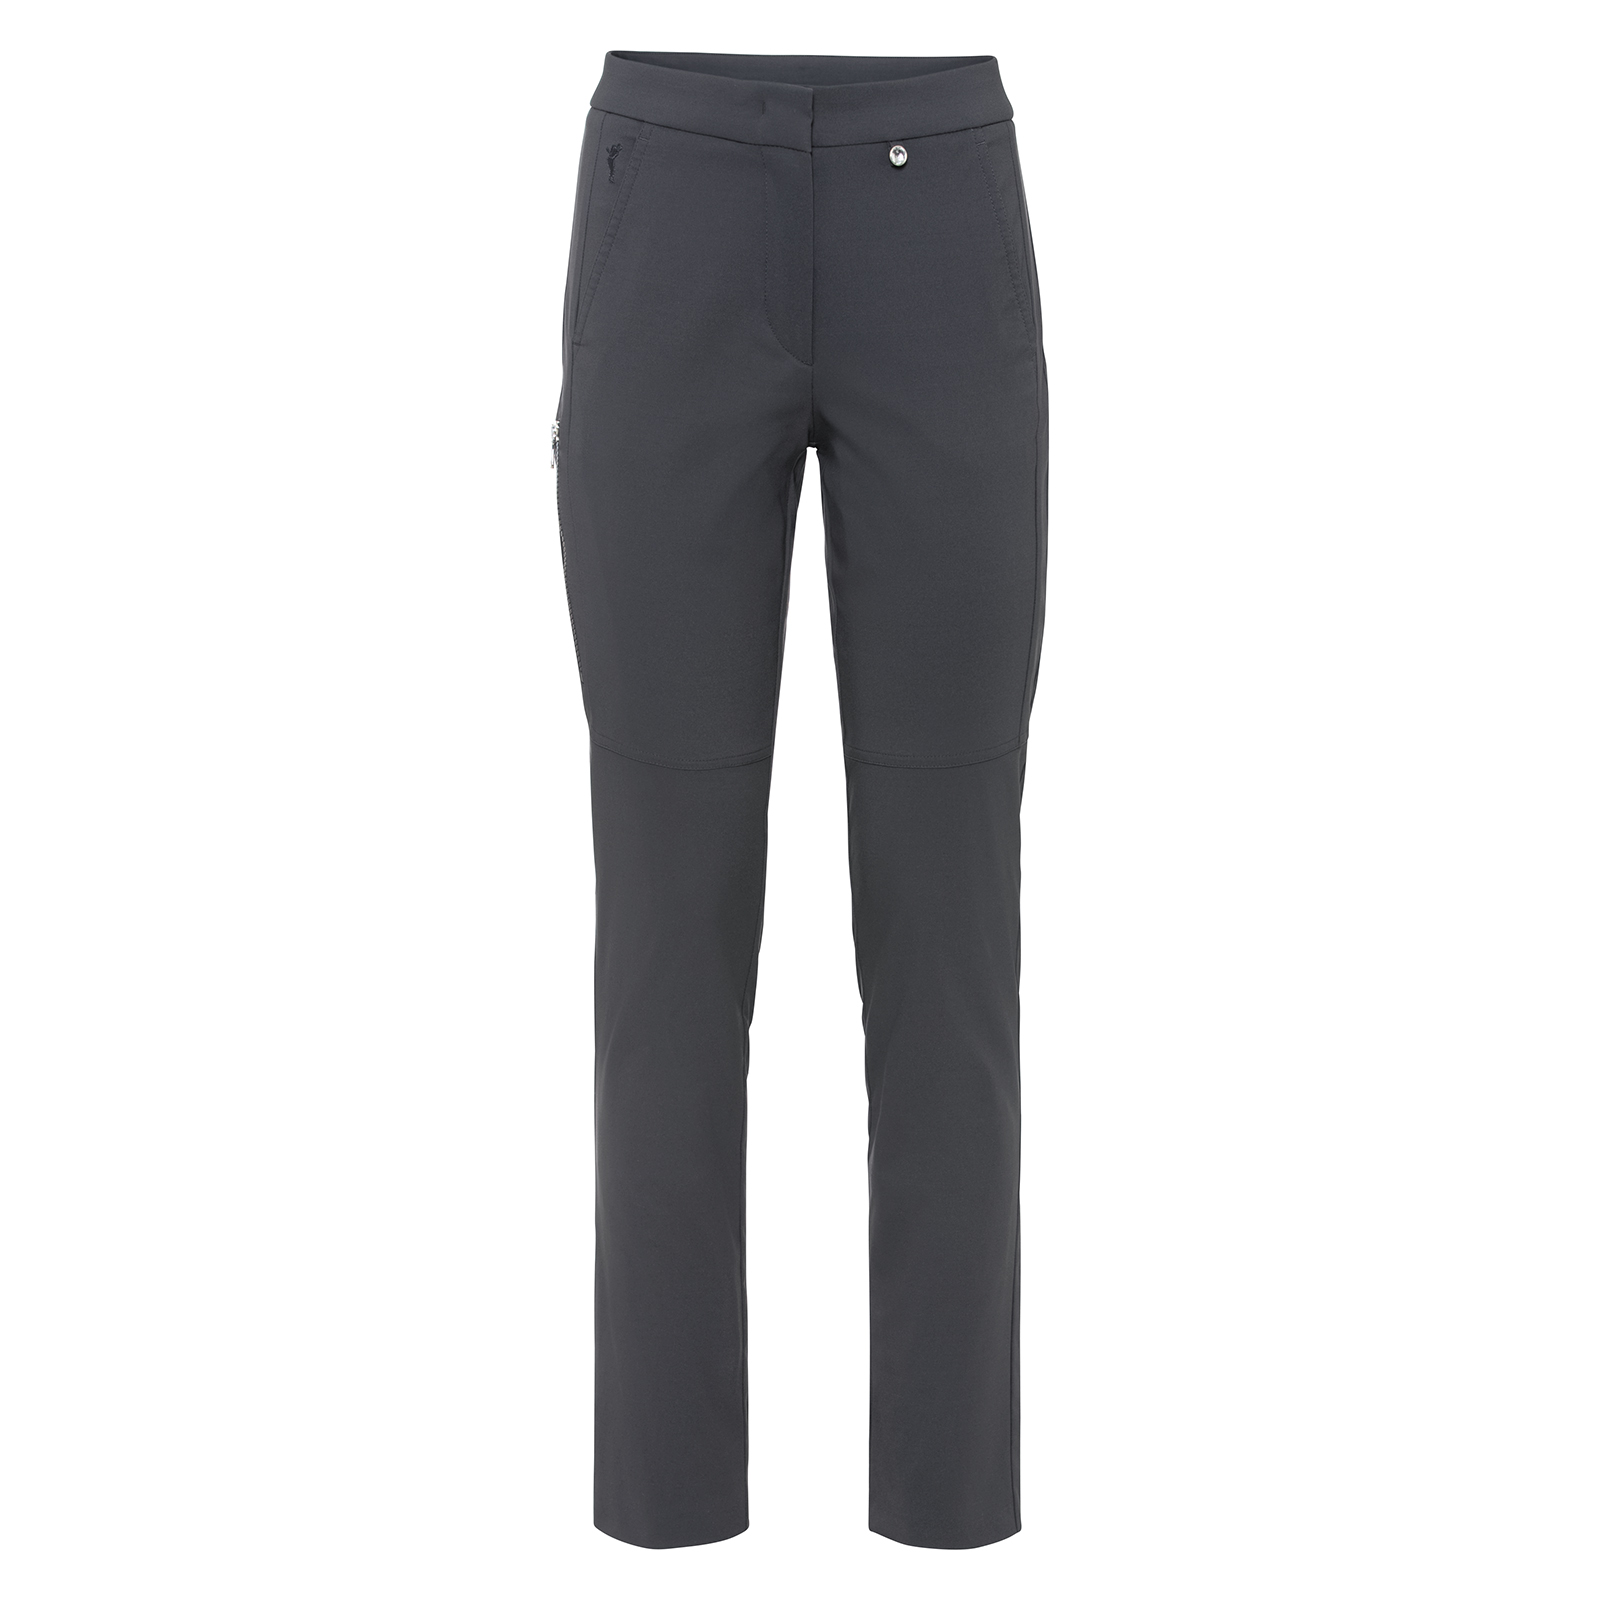 Ladies' 4-way stretch golf trousers with innovative side pocket